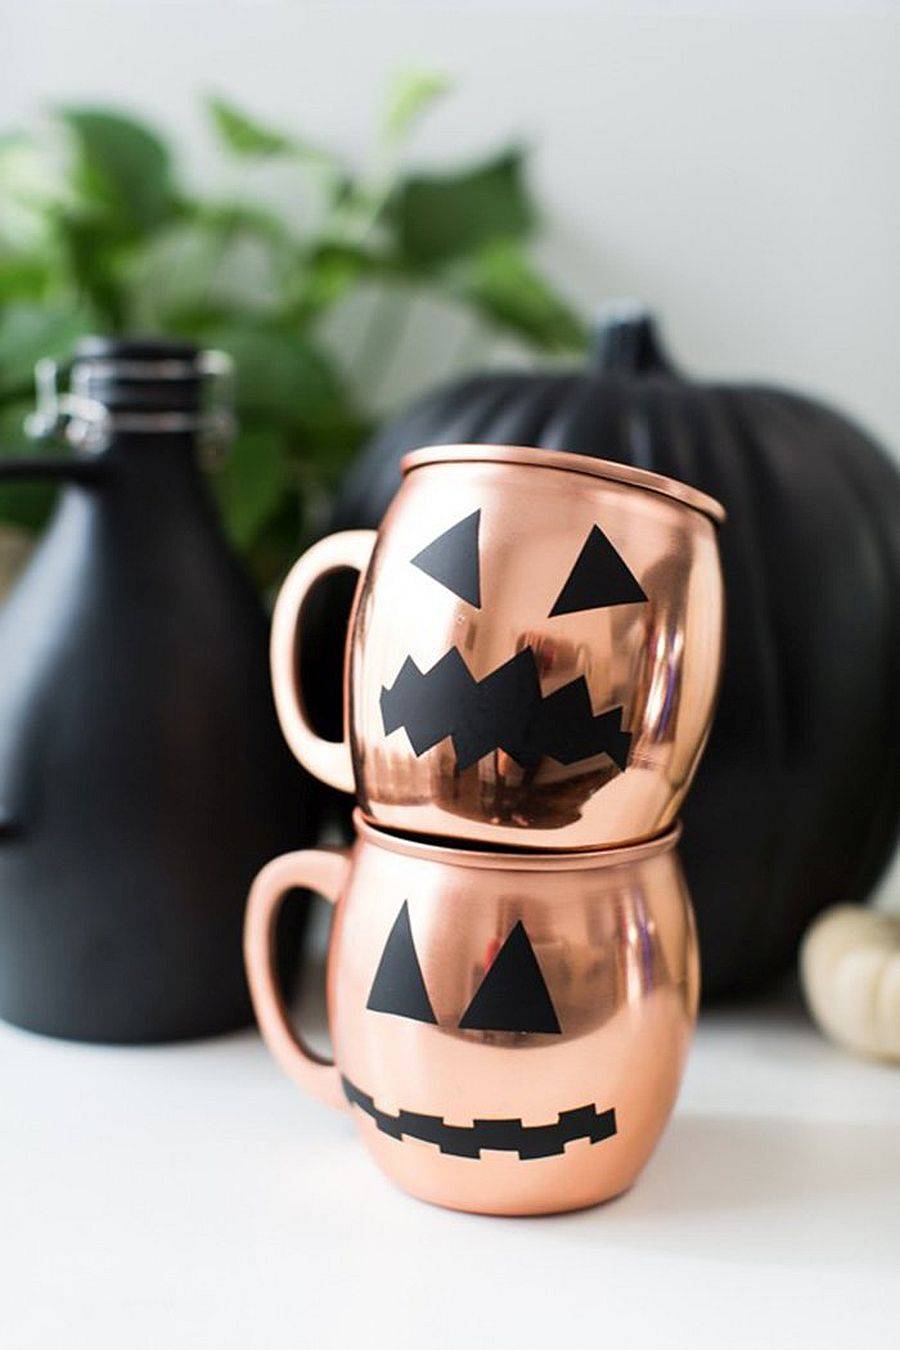 DIY Halloween glassware decals offer an easy last-minute decorating idea